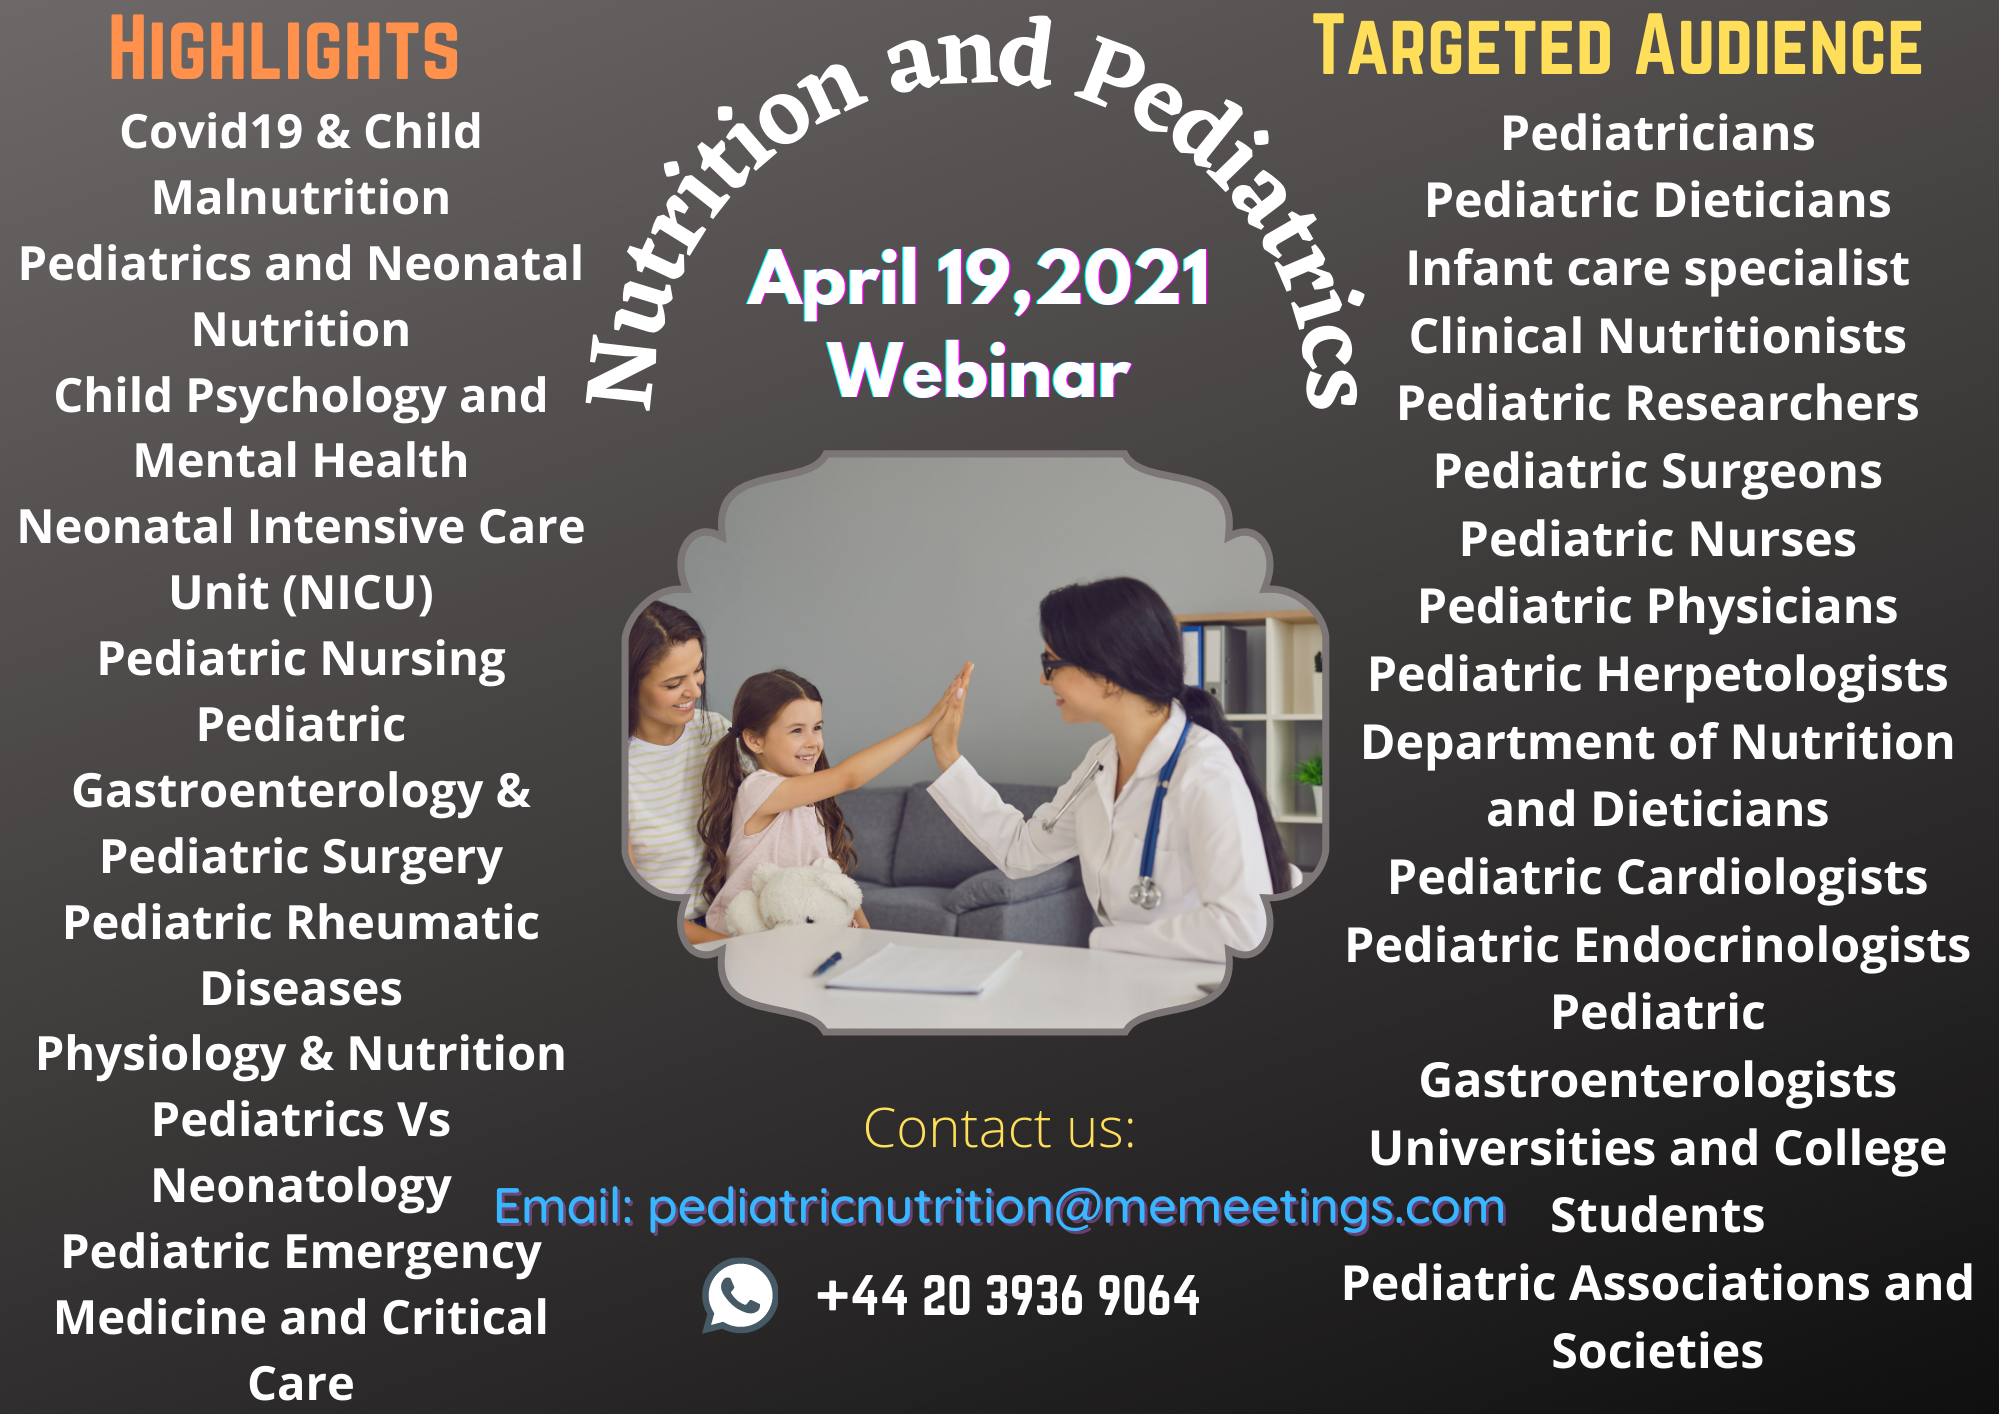 25th World Nutrition and Pediatrics Healthcare Conference